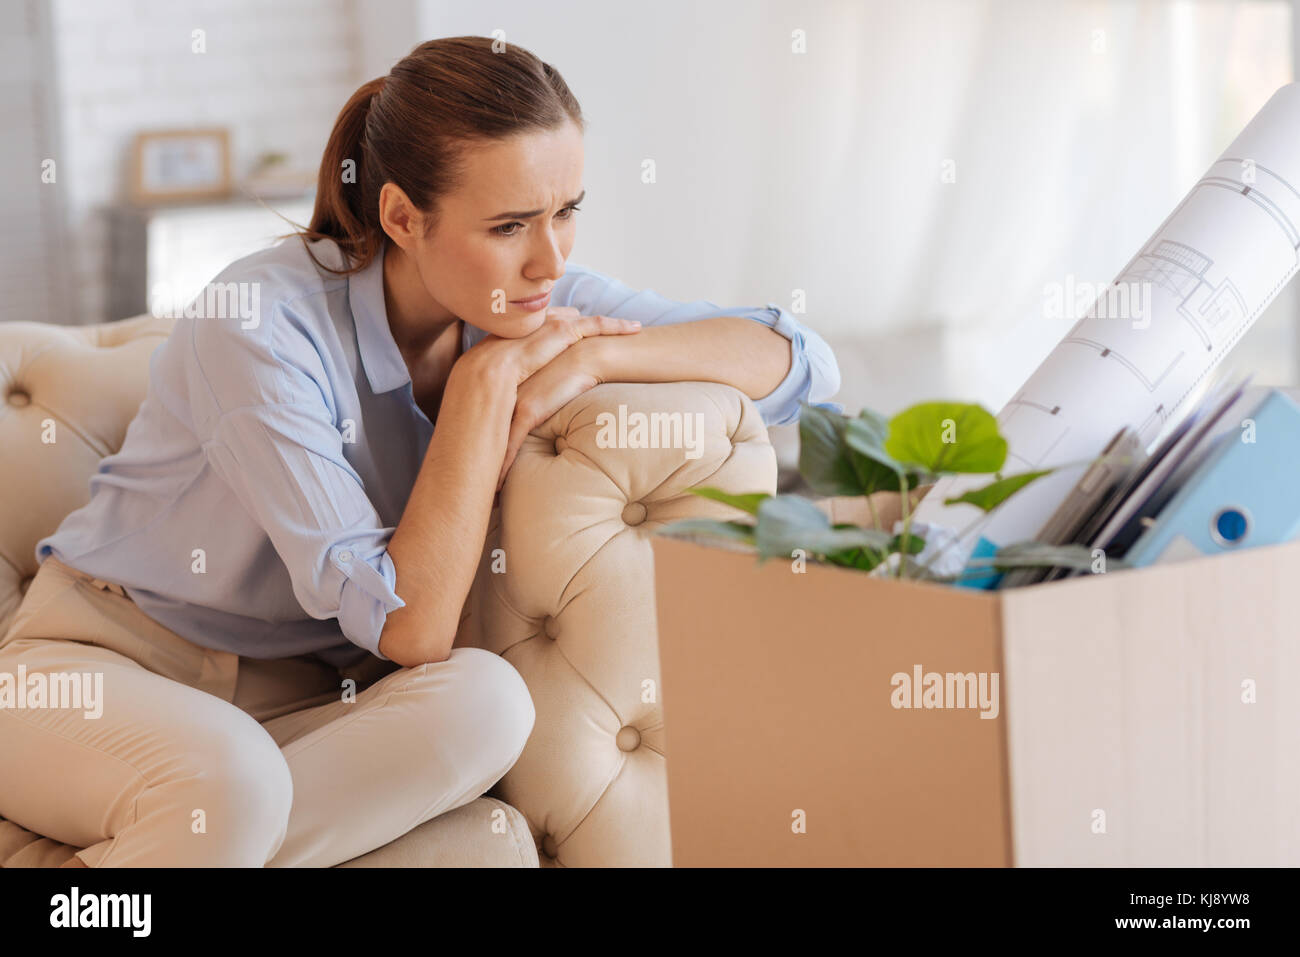 Thoughtful jobless engineer sitting alone and feeling sad Stock Photo